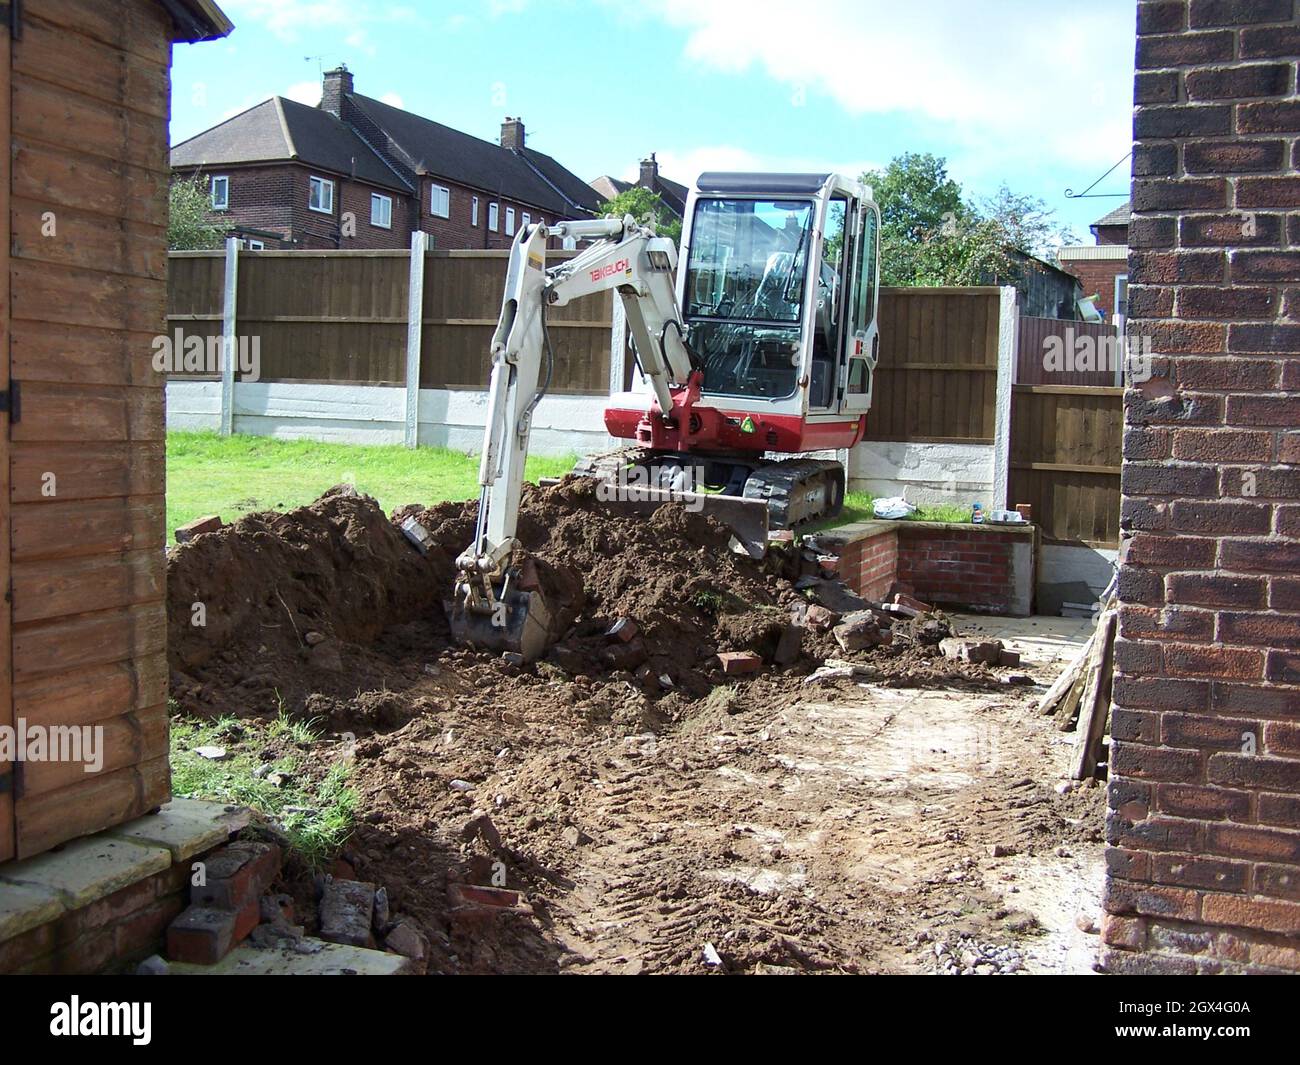 Workman using a mini digger to excavate a hole for extension footings in a garden lawn with green grass Stock Photo